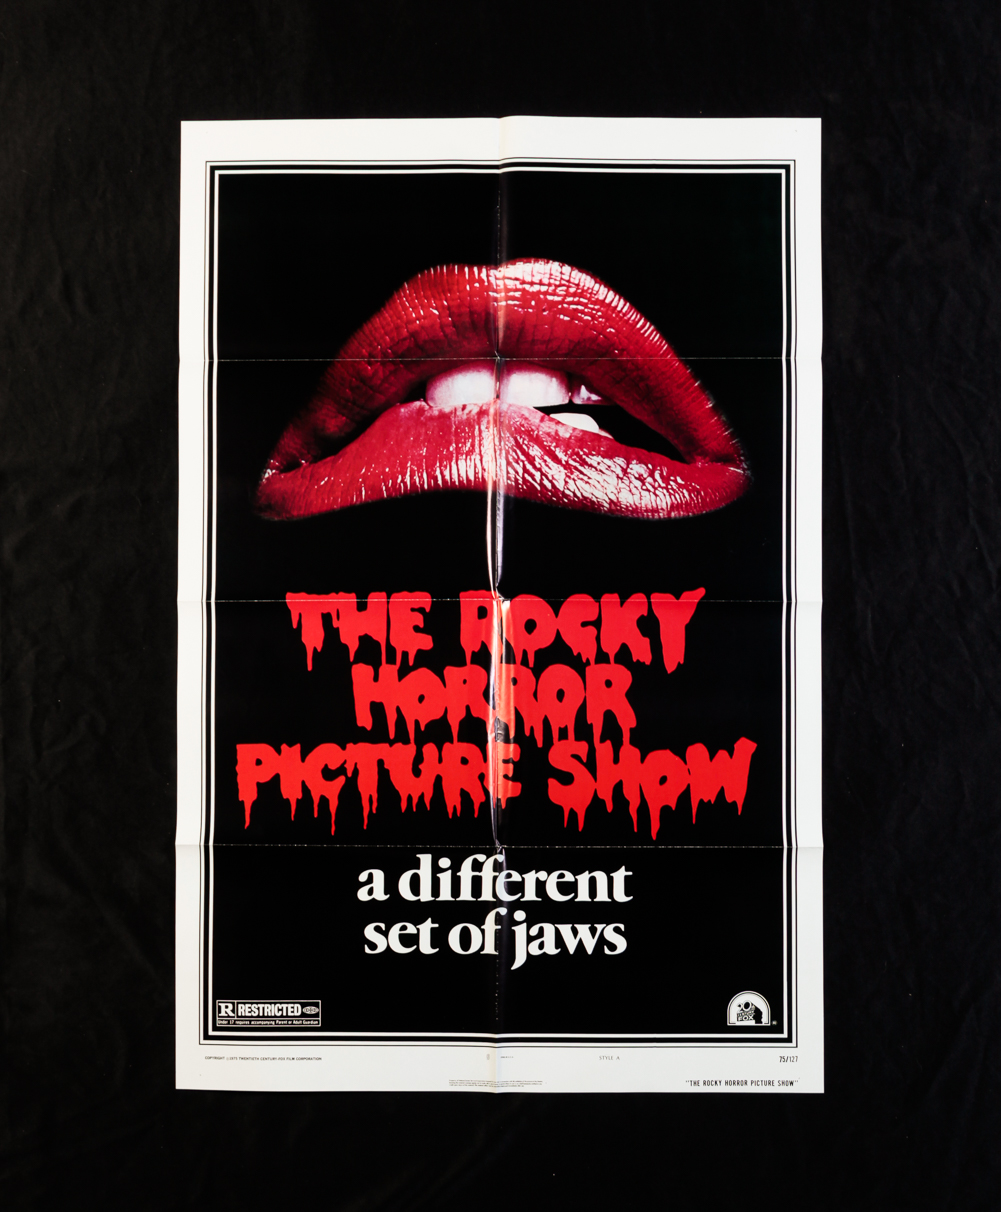 ROCKY HORROR PICTURE SHOW (20TH